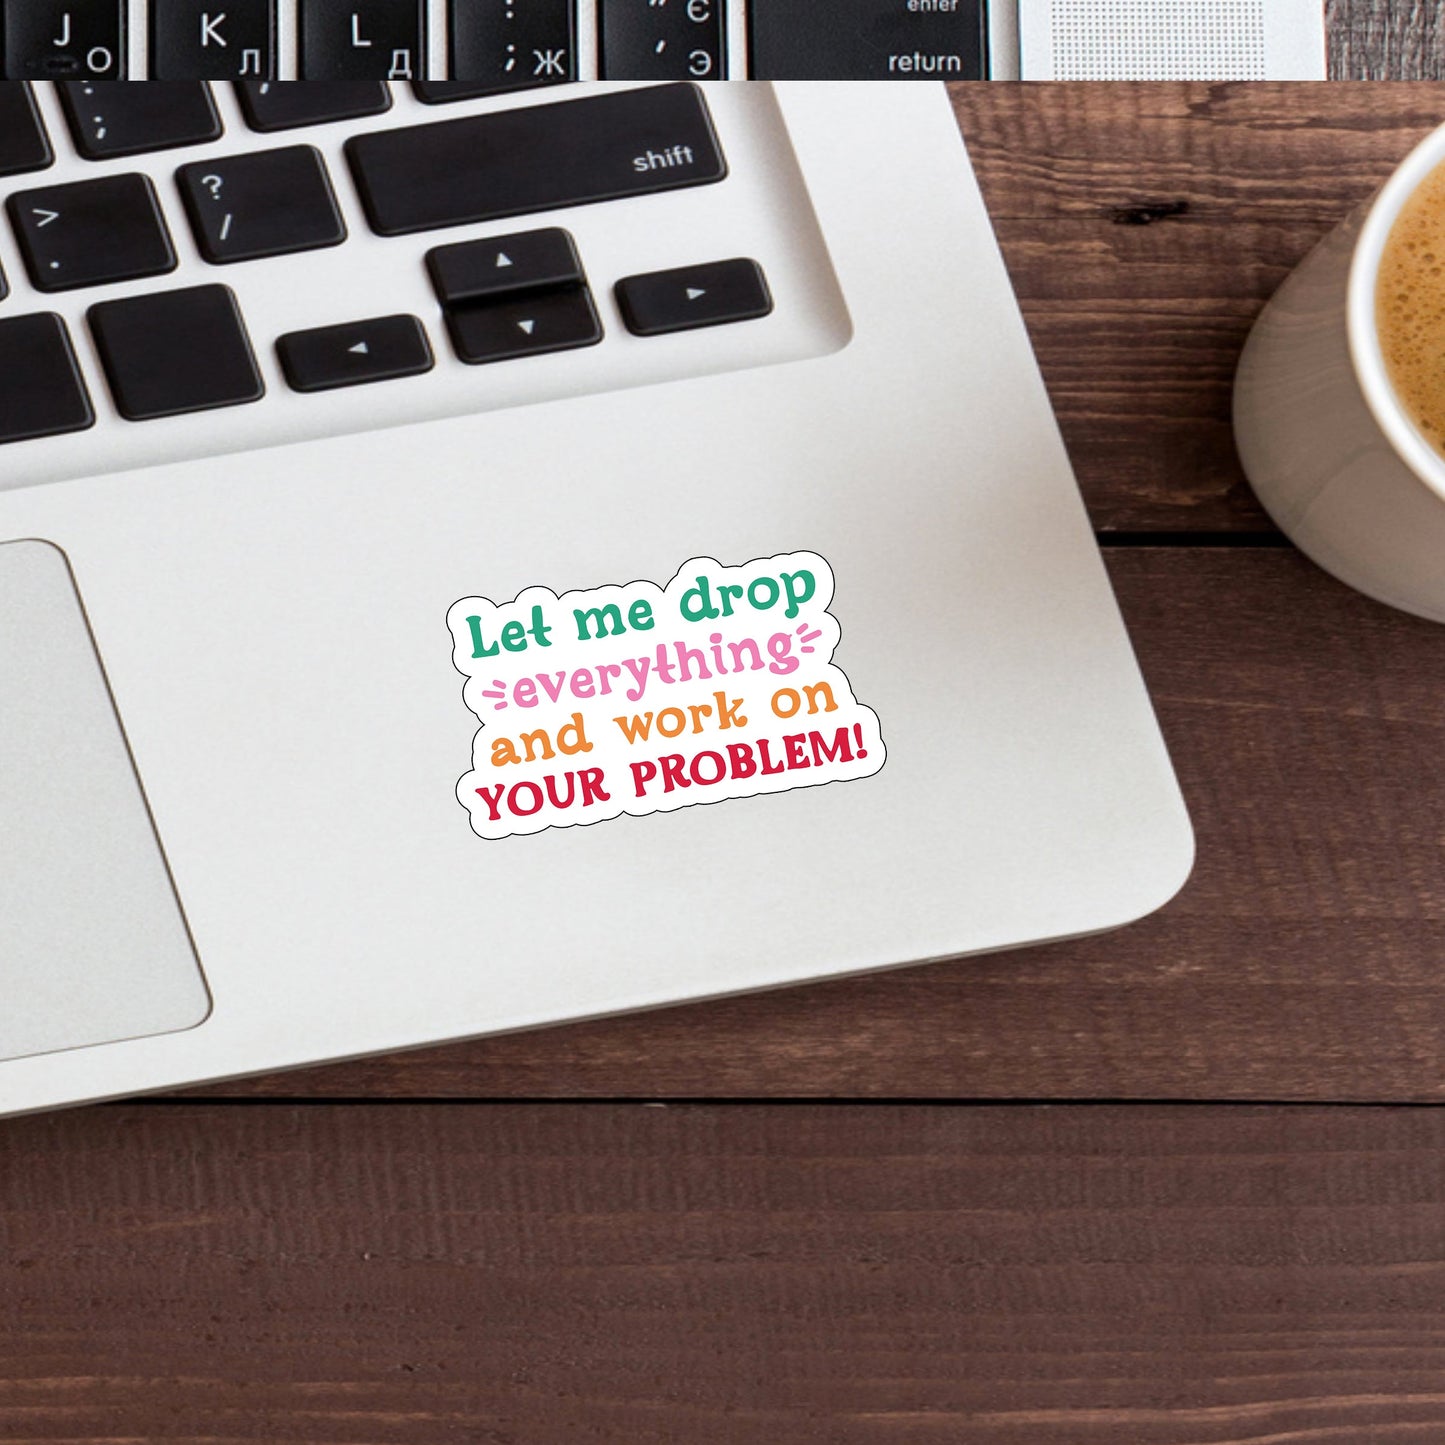 Let me drop every thing and work on your problem  Sticker,  Vinyl sticker, laptop sticker, Tablet sticker